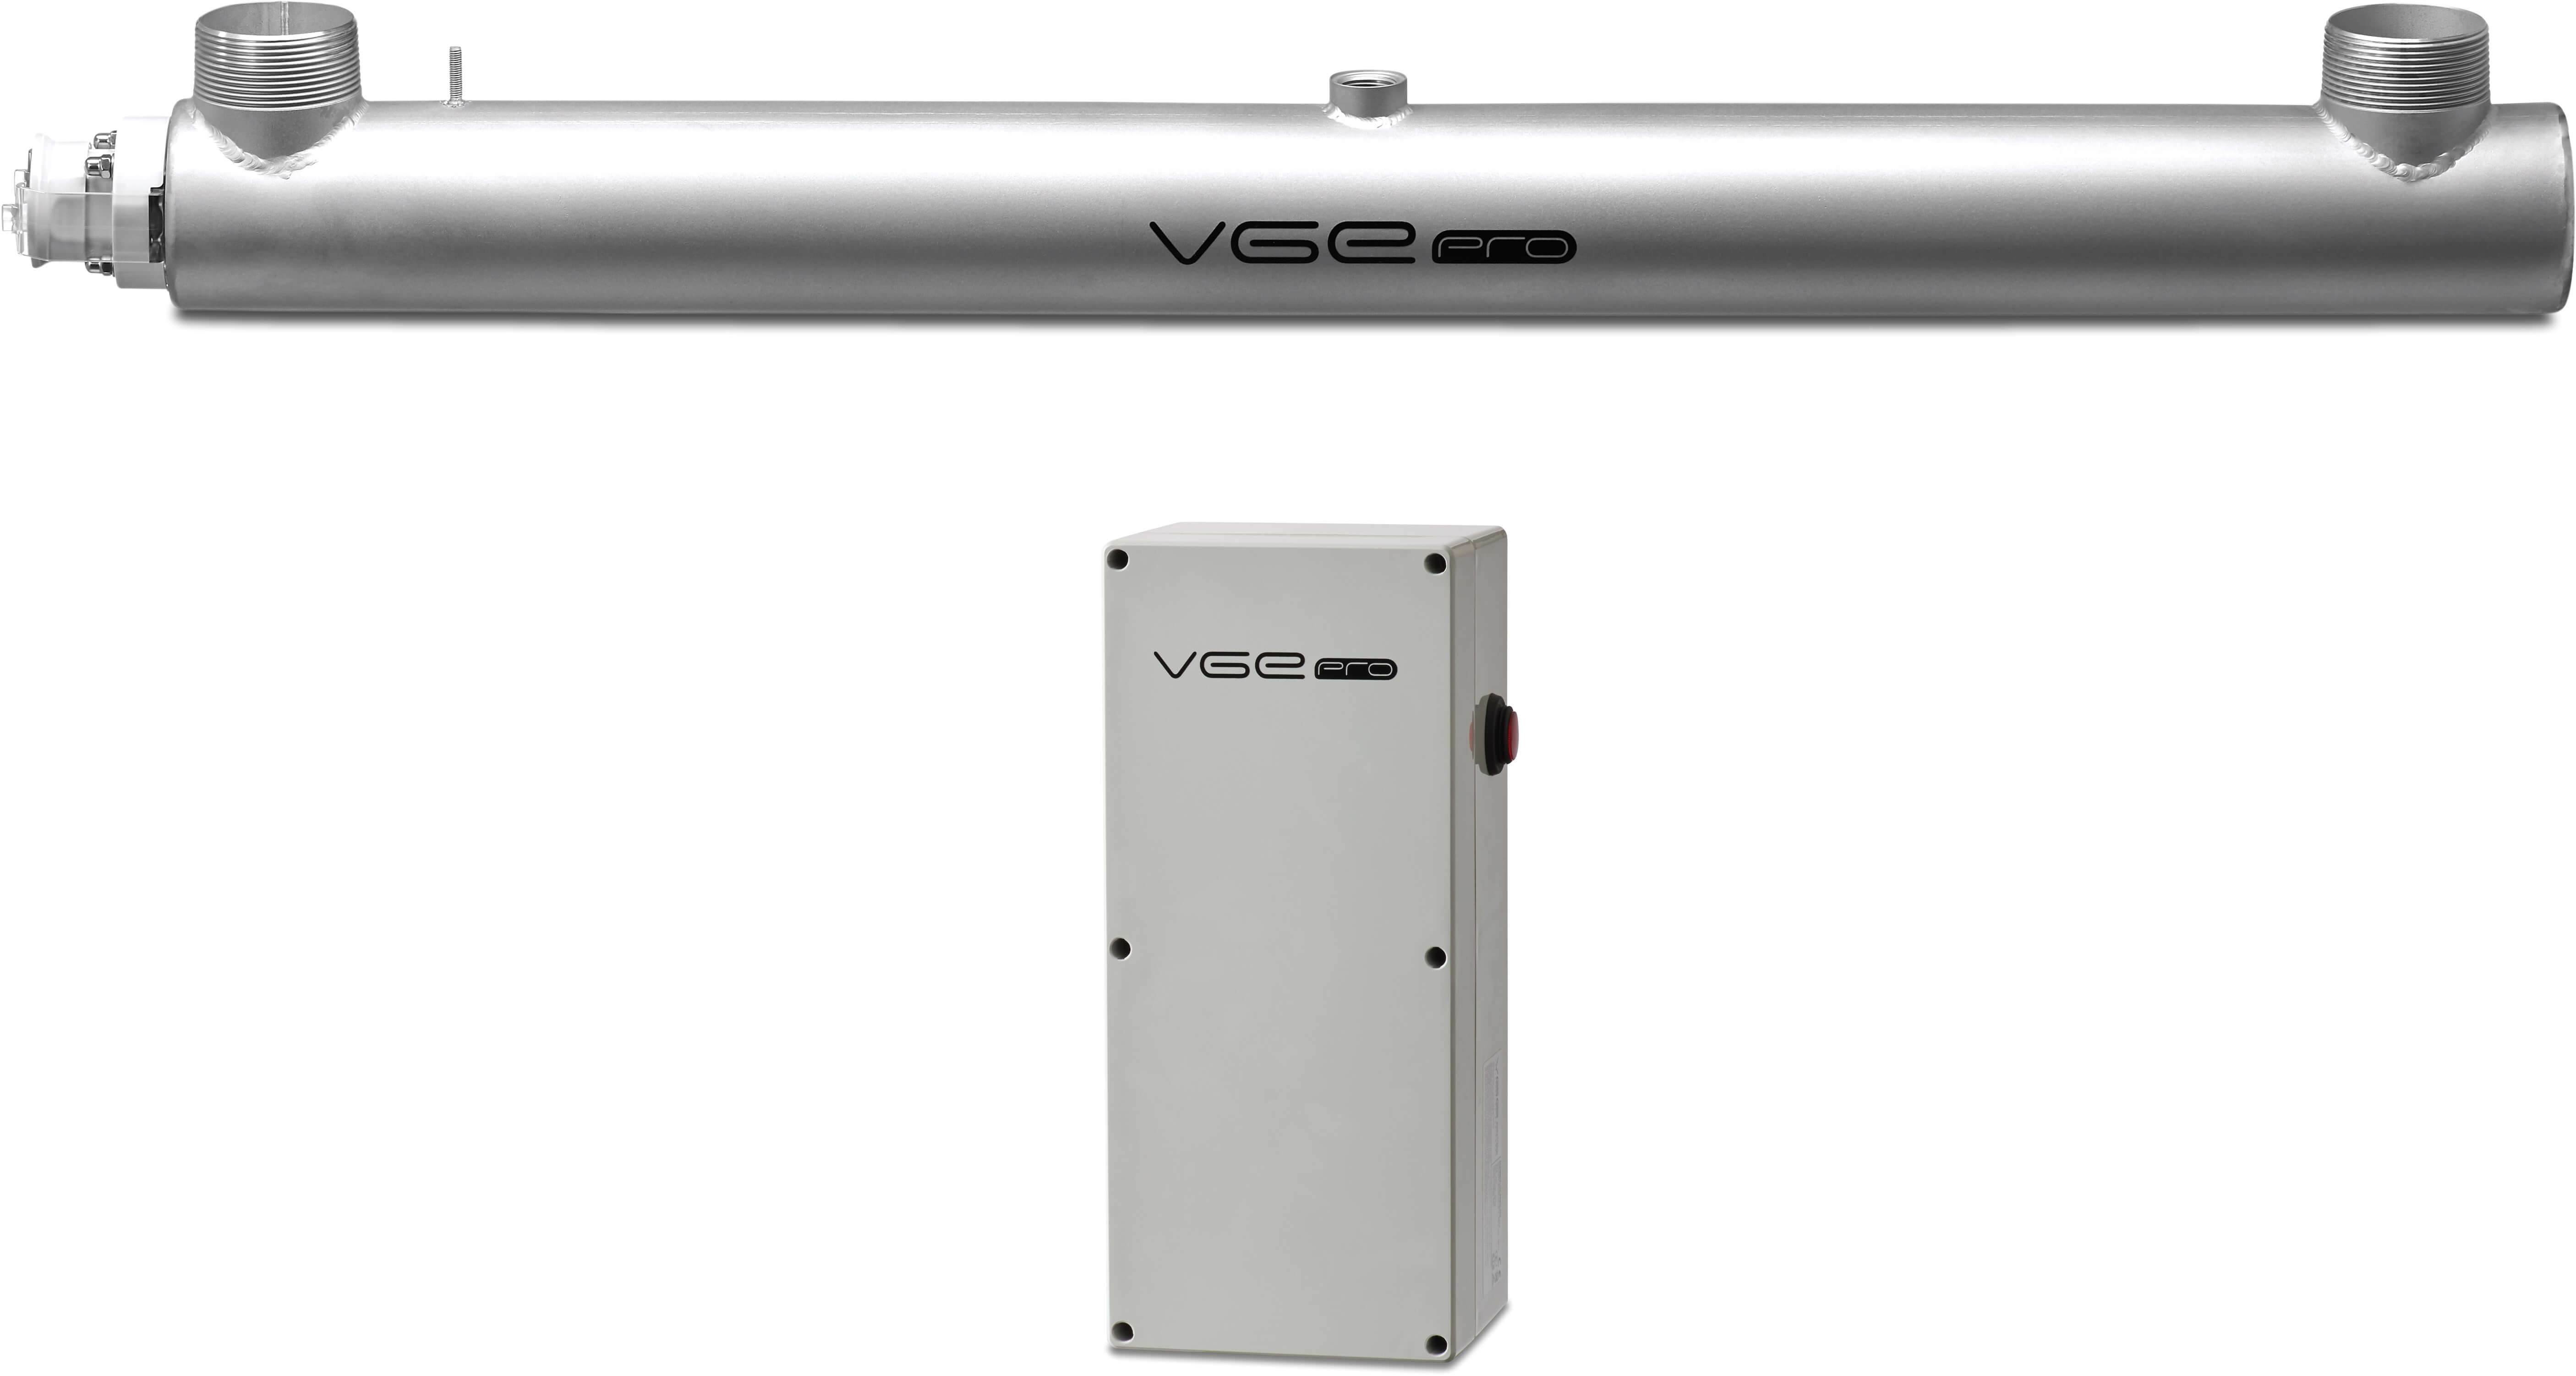 VGE Pro Low pressure lamp UV system stainless steel type Basic 200-76